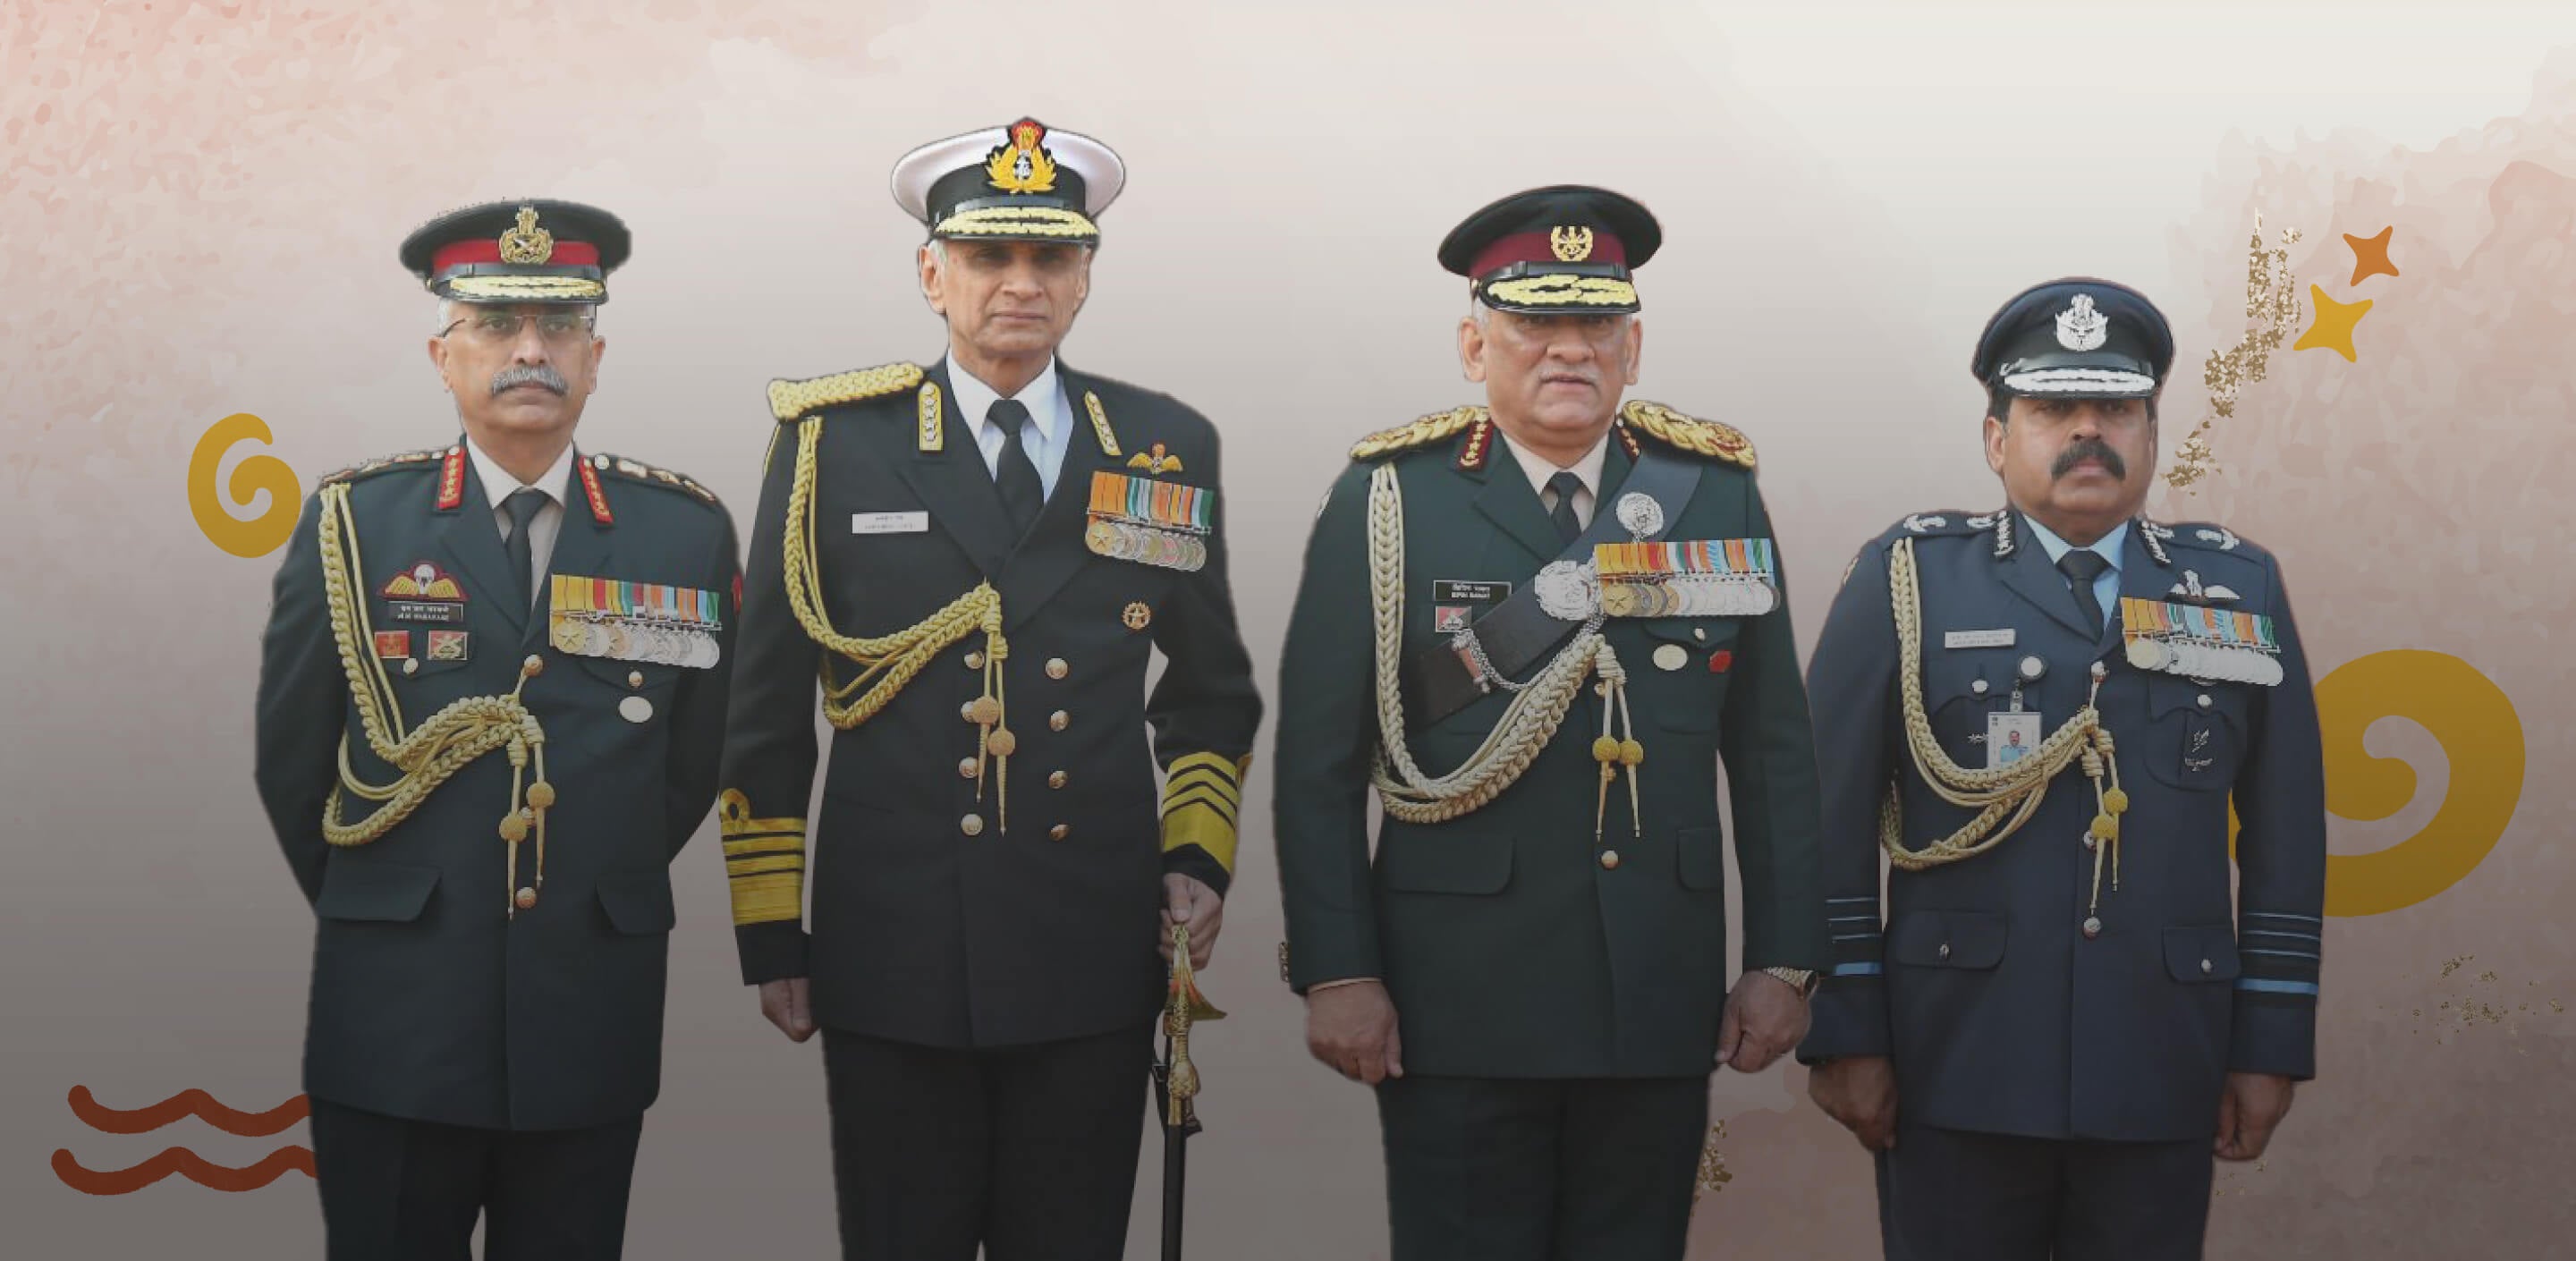 Evolution of Indian Military uniforms